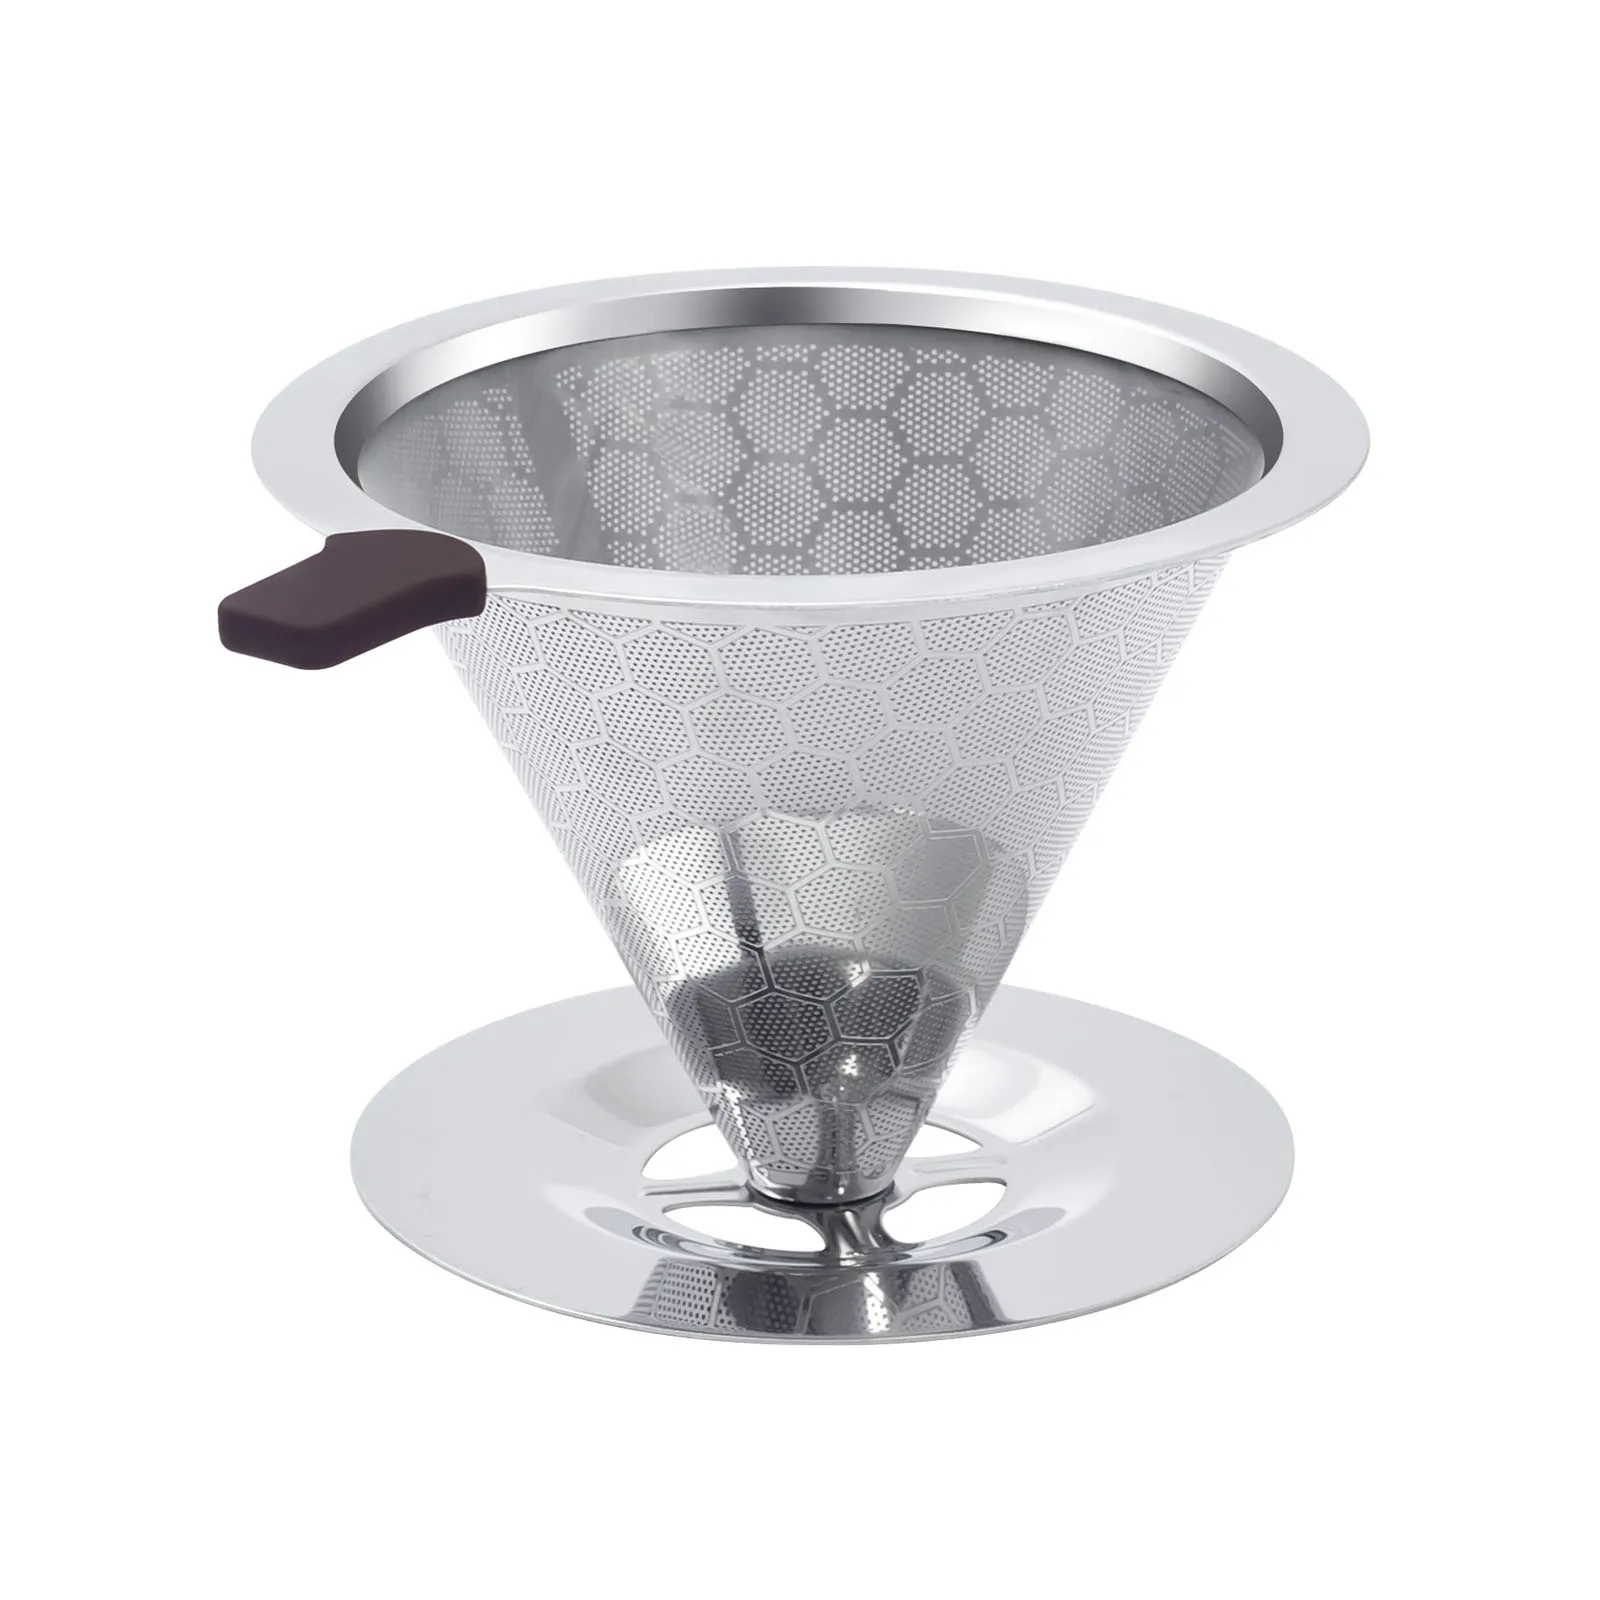 

Coffee Funnel Filter Cone Pour Over Dripper Mesh Cup Paperless Stainless Steel Coffee Maker with Holder Espresso Accessories